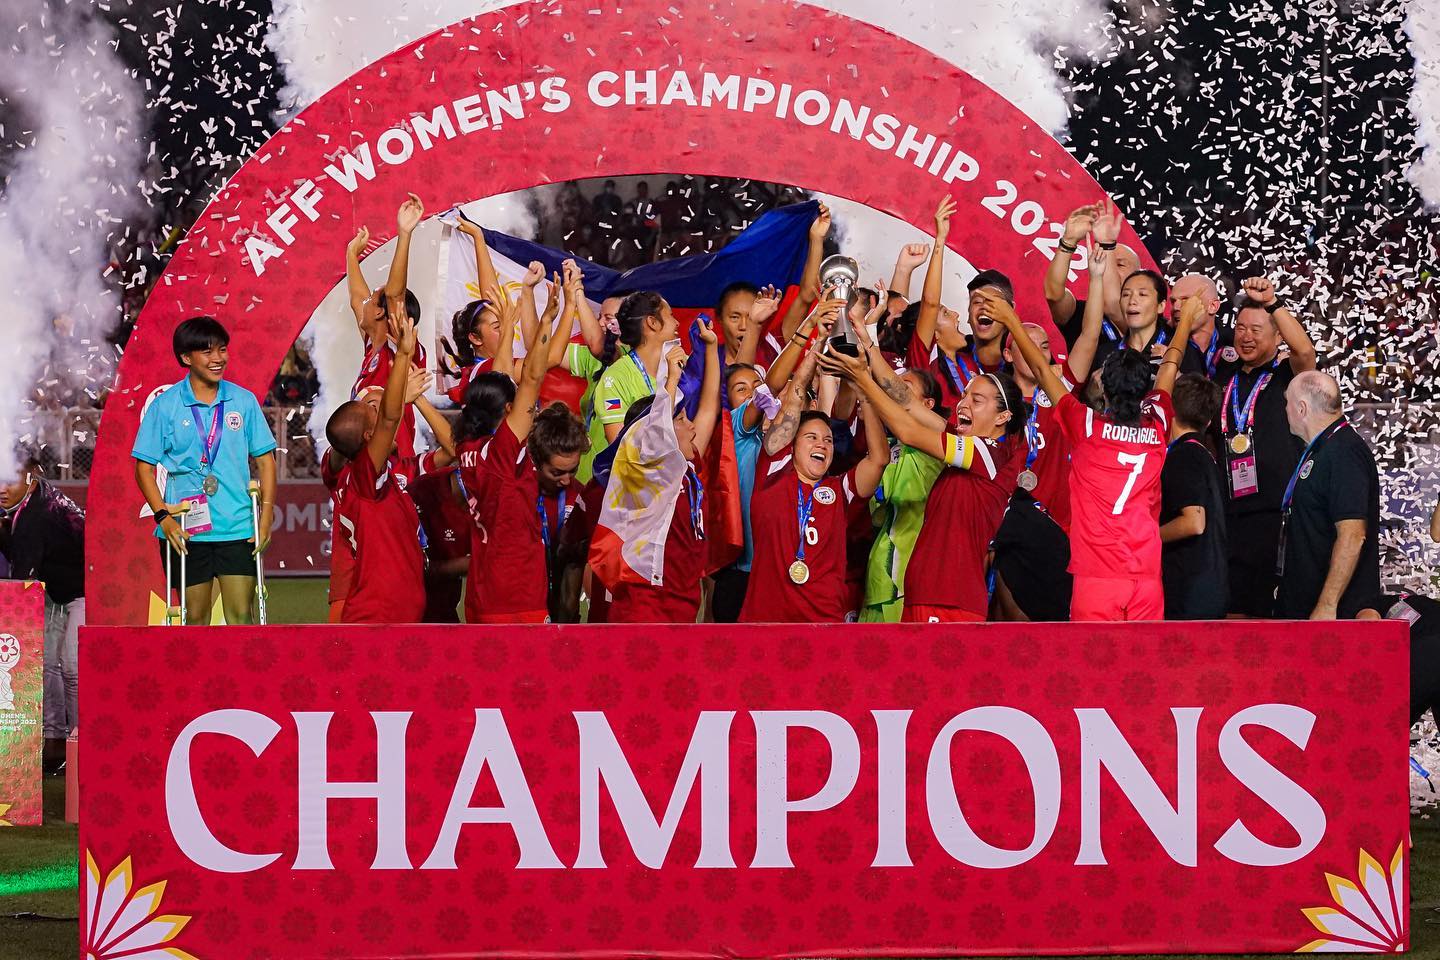 The Filipinas were crowned the AFF Women's Champions in front of over 8000 Filipino fans